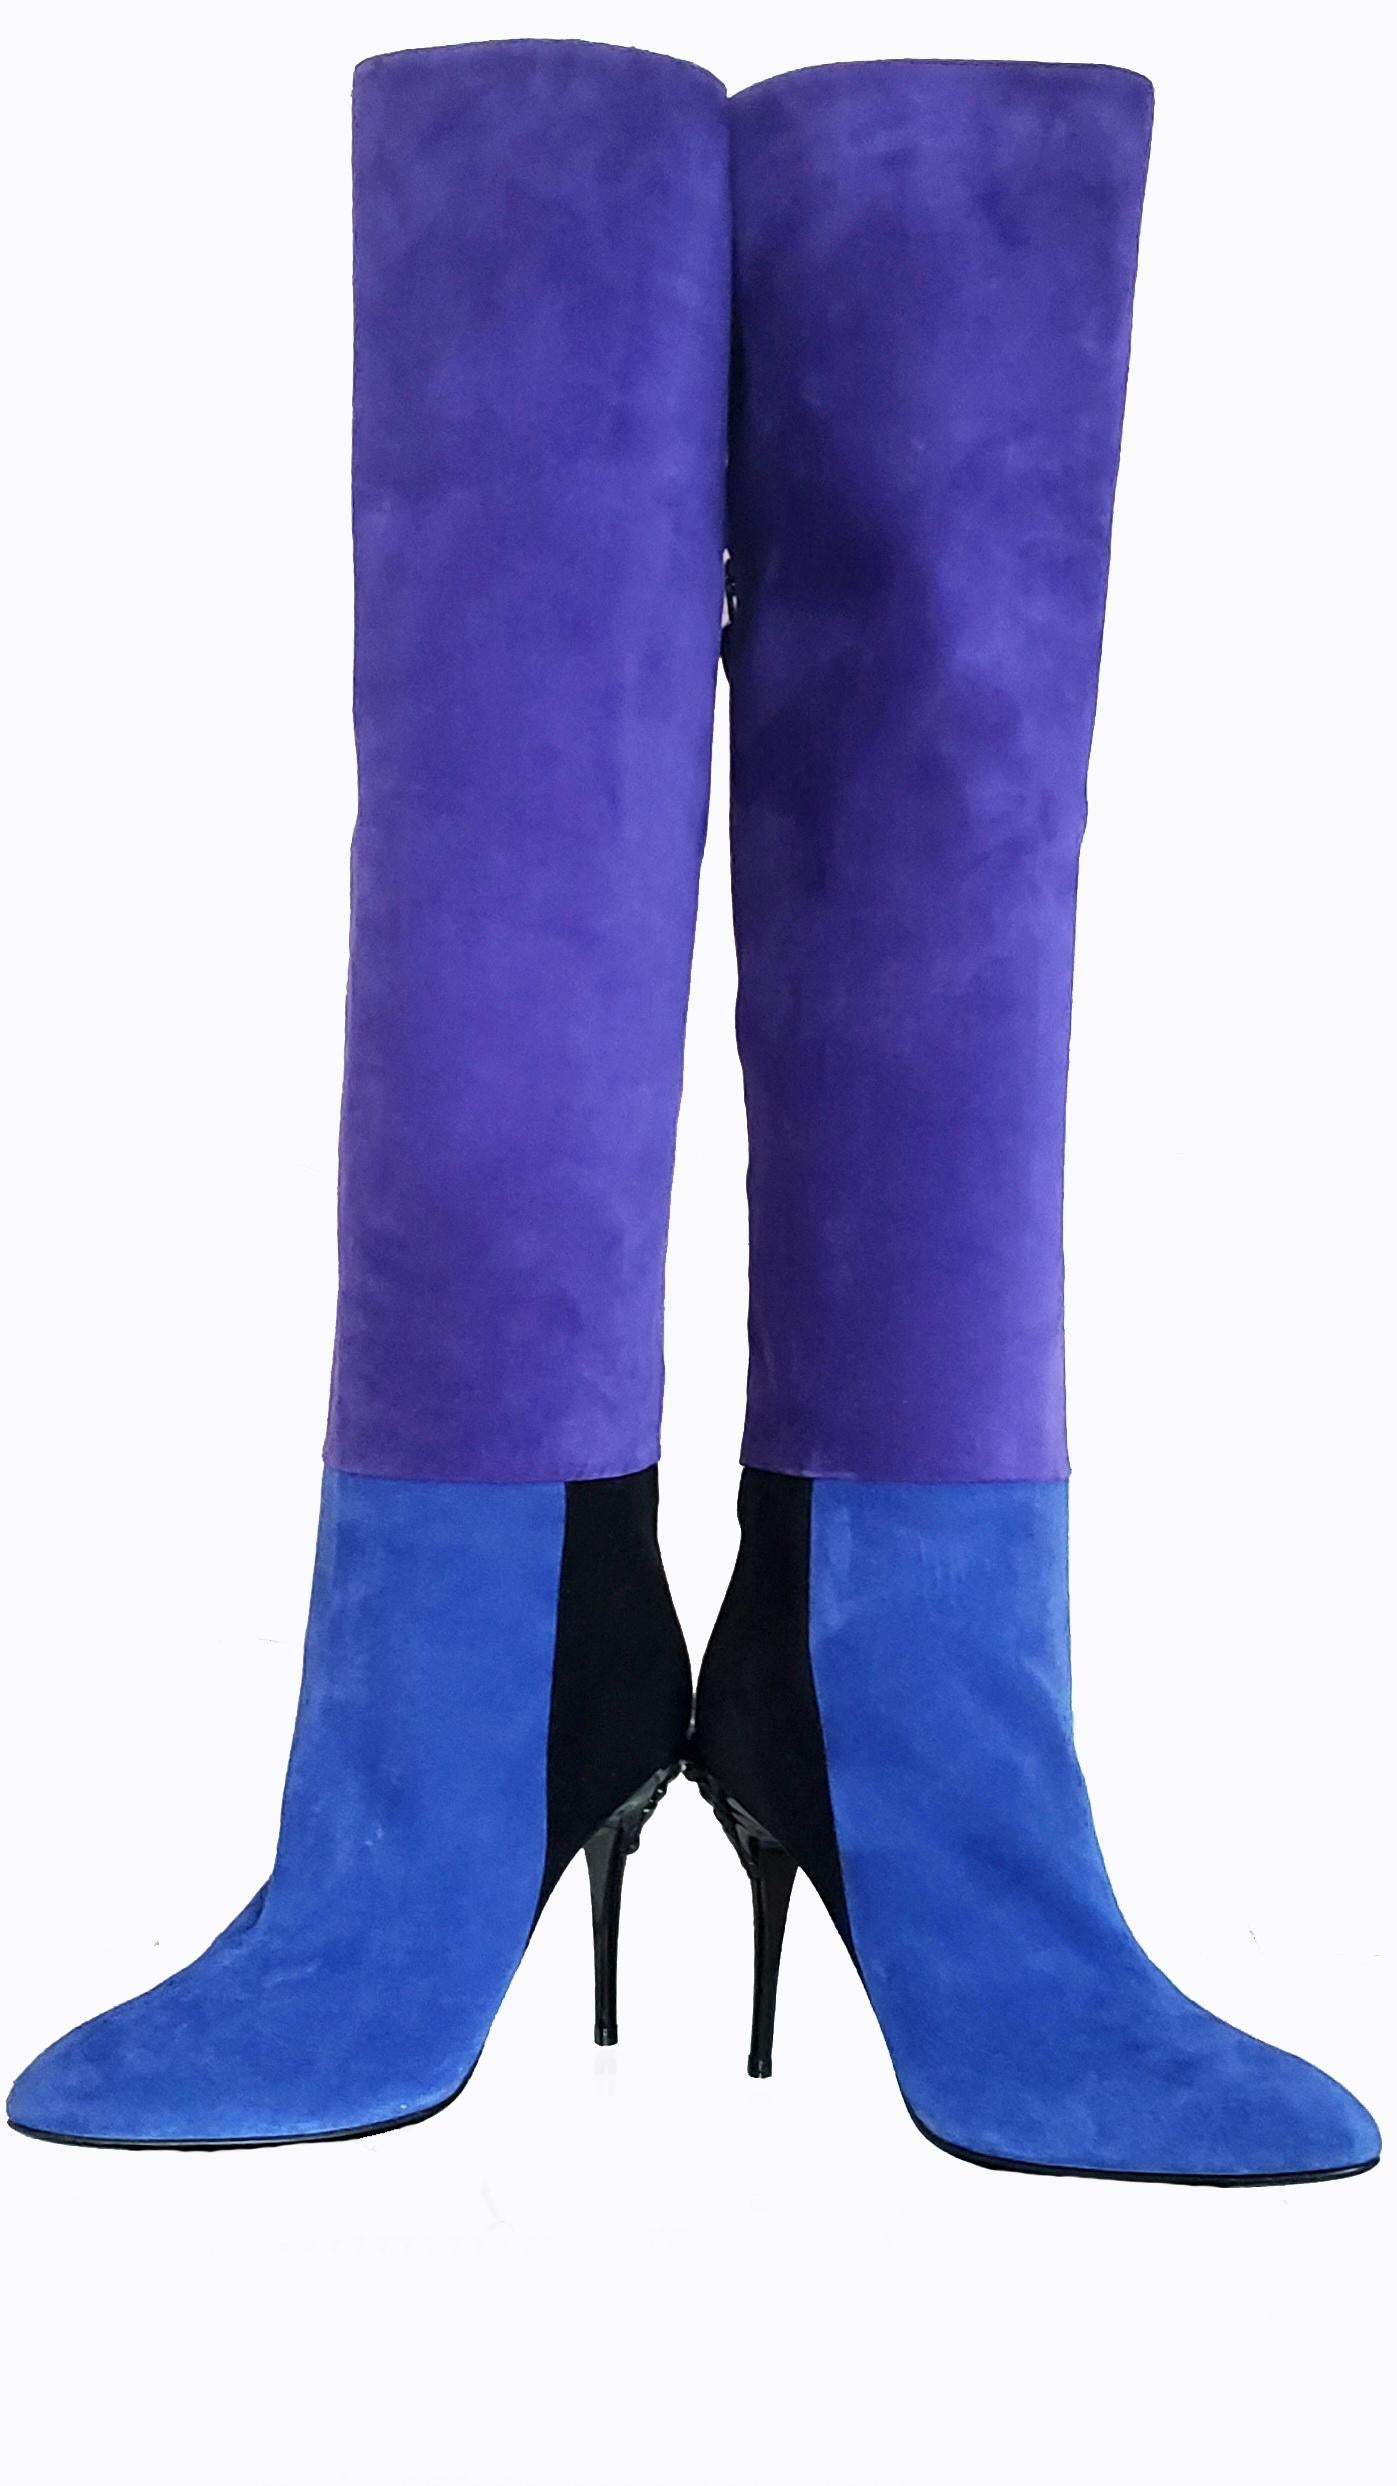 Blue New VERSACE COLOR BLOCK BLUE SUEDE PALAZZO BOOTS 37 - 7 For Sale